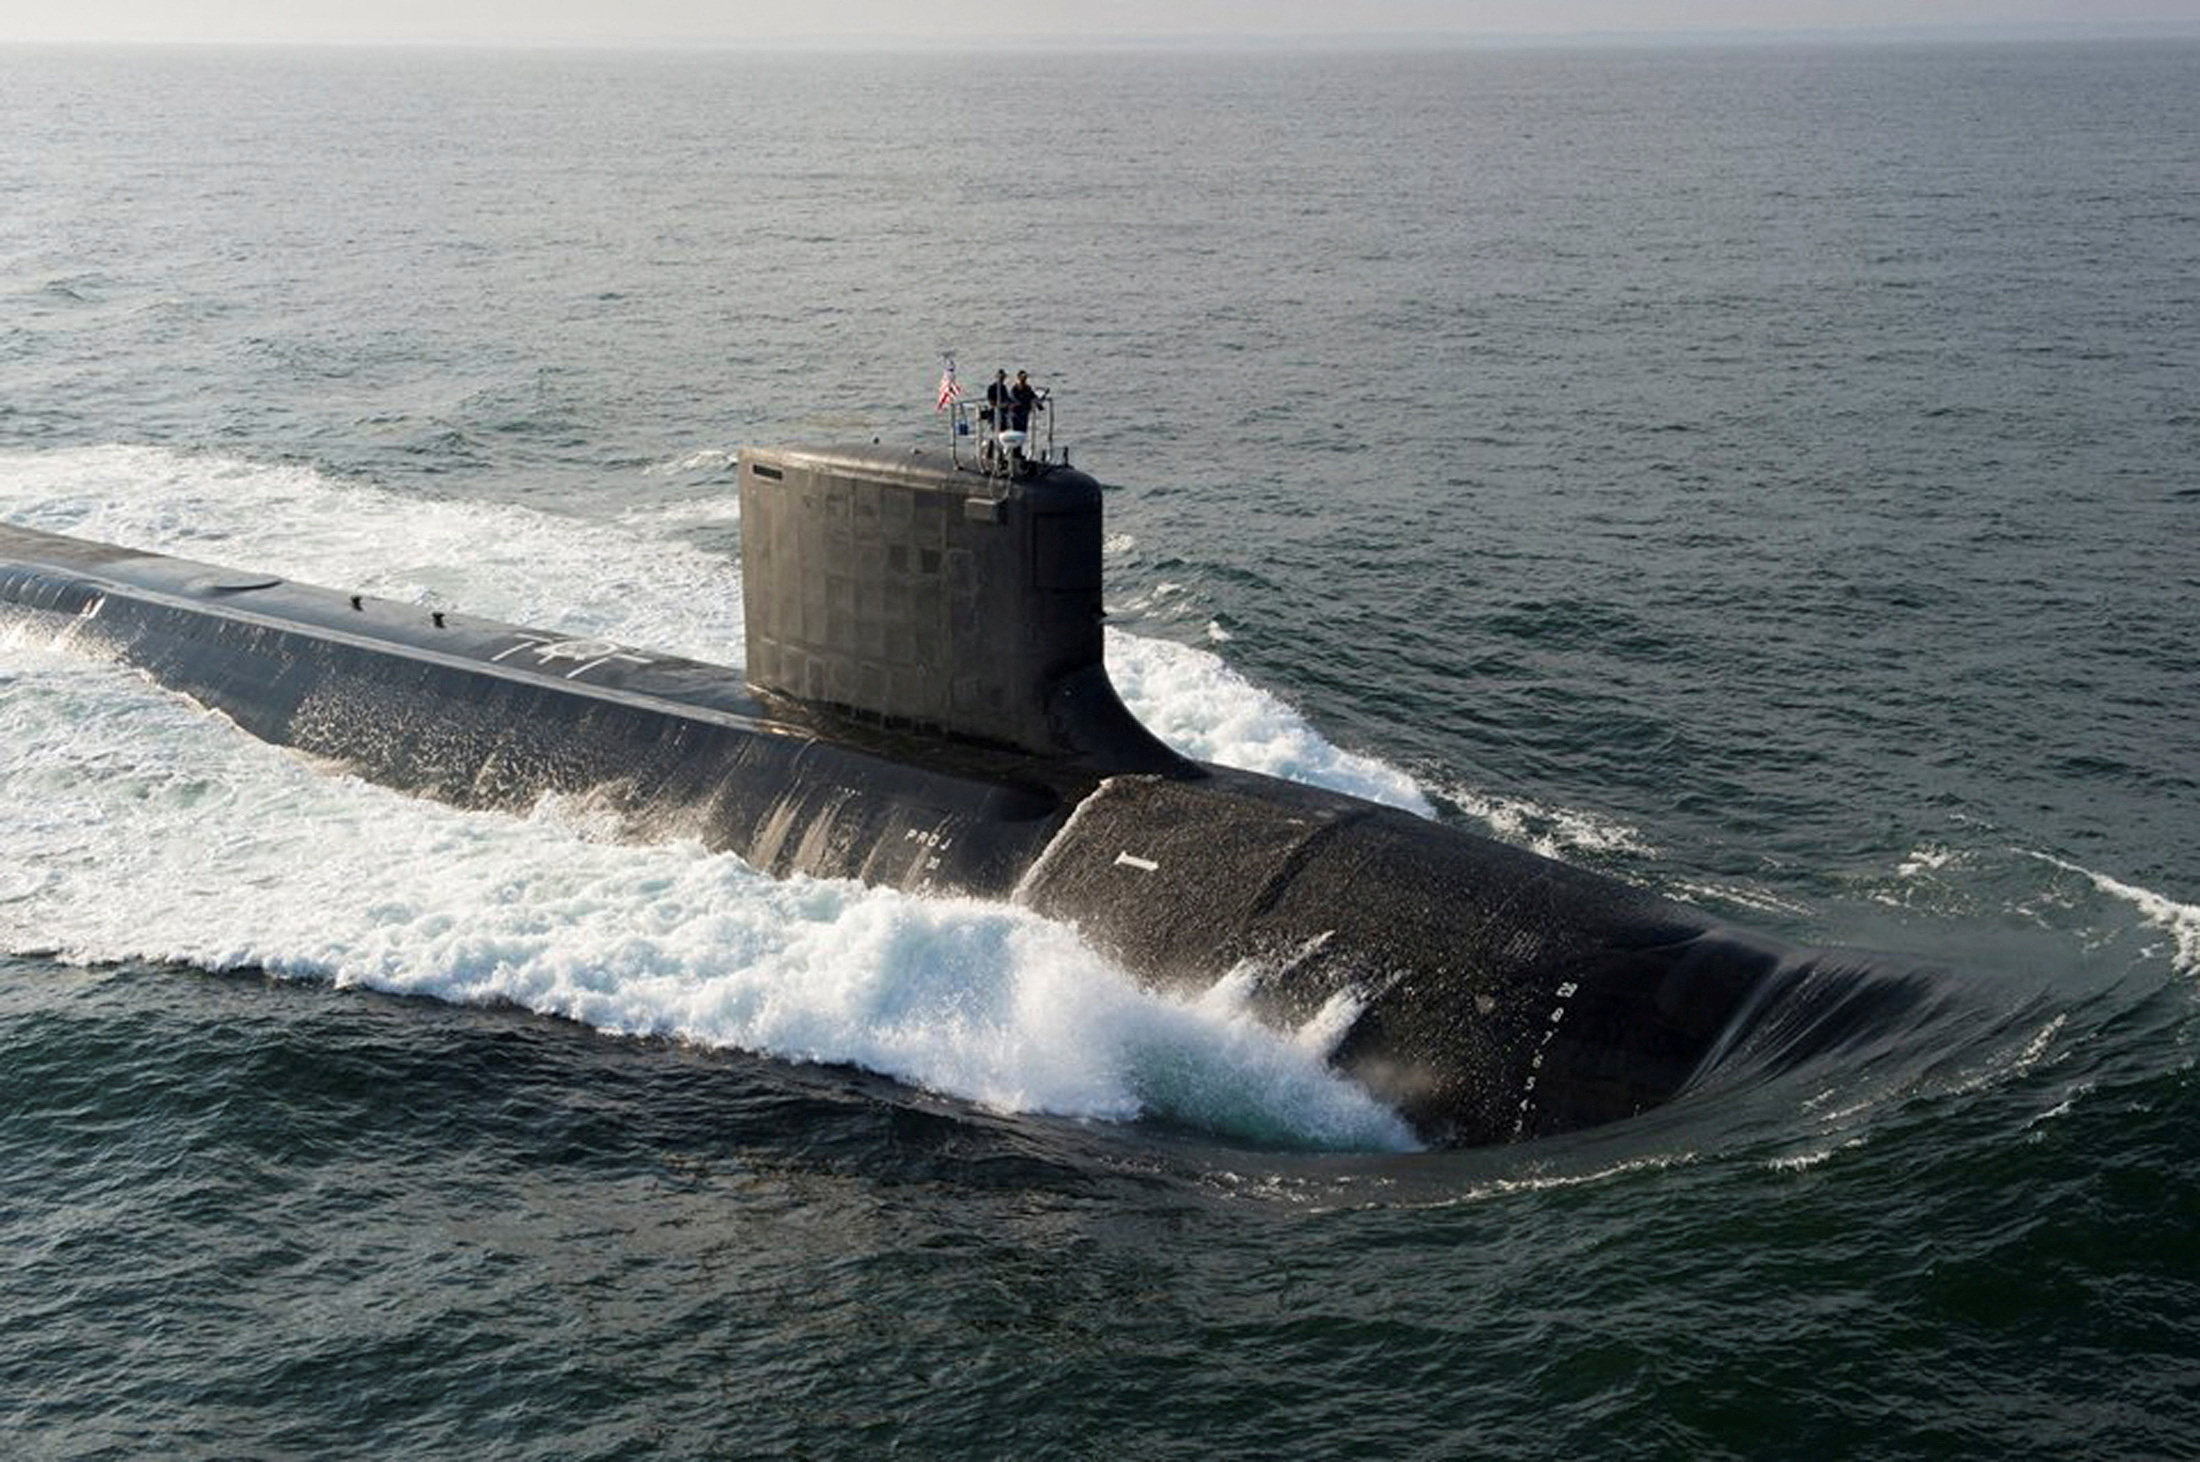 FILE PHOTO: The Virginia-class USS North Dakota submarine is seen during bravo sea trials in this U.S. Navy handout picture